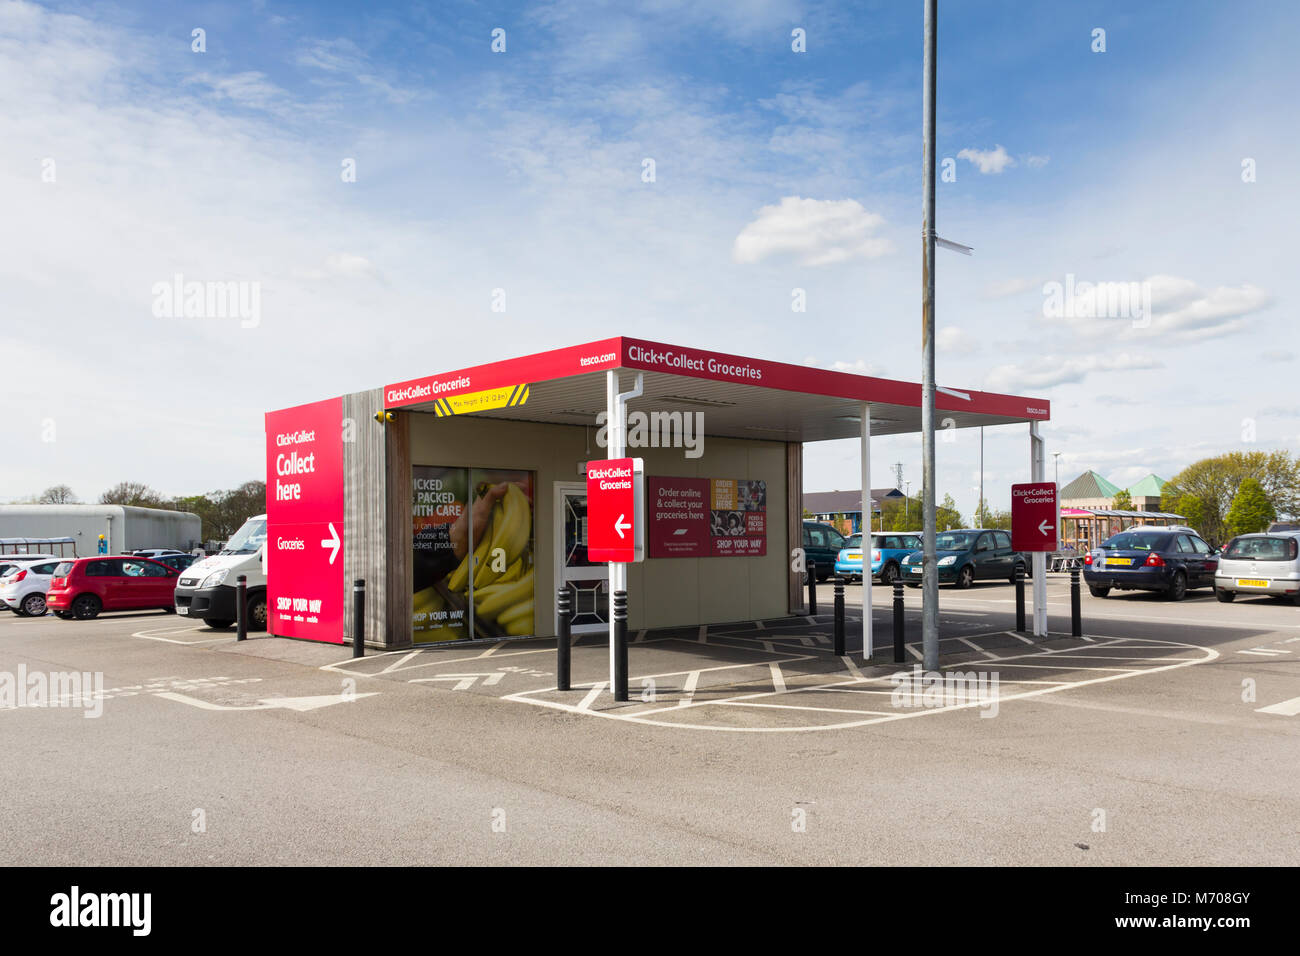 Tesco Click and Collect point at the Tesco Chorley Buckshaw superstore, Lancashire. Stock Photo